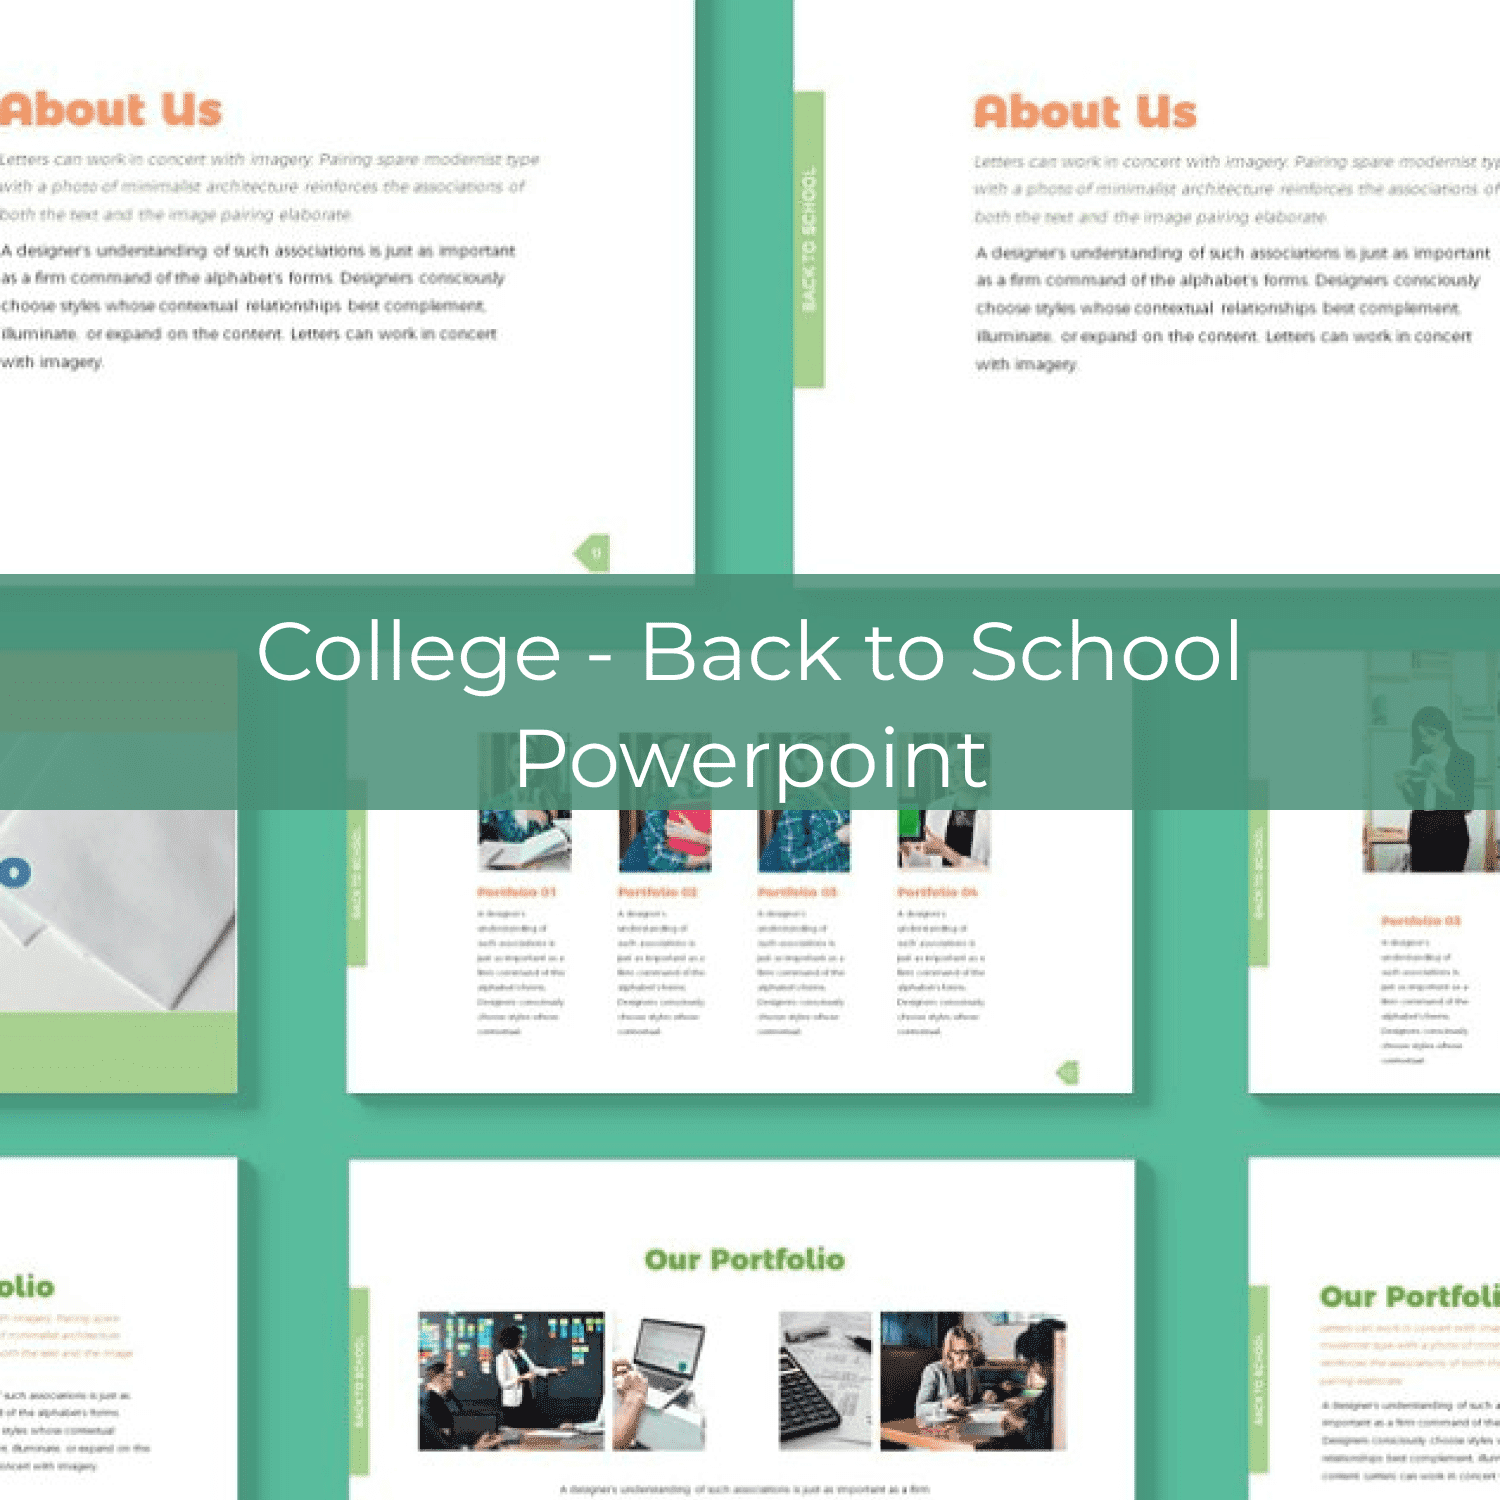 college back to school powerpoint preview image.